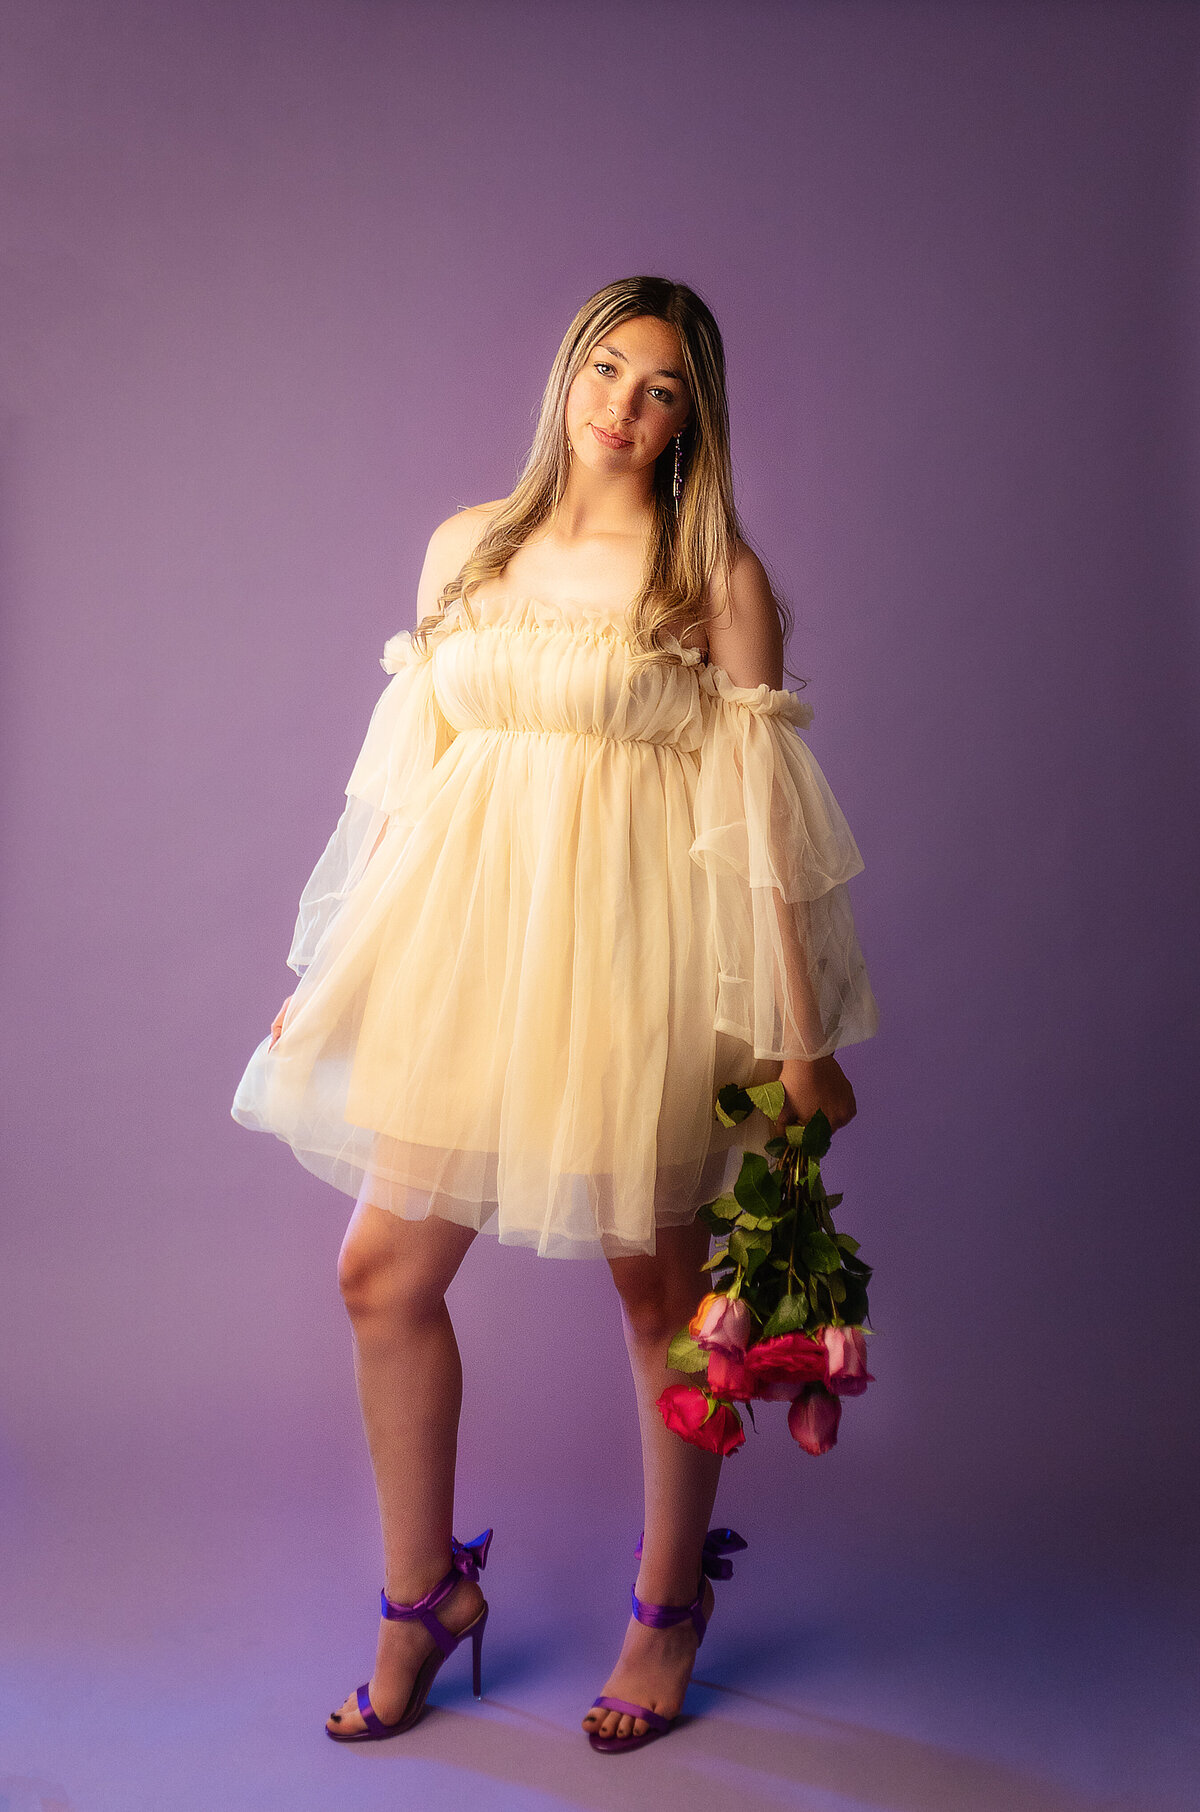 In studio high school senior session with a purple background and fresh flowers